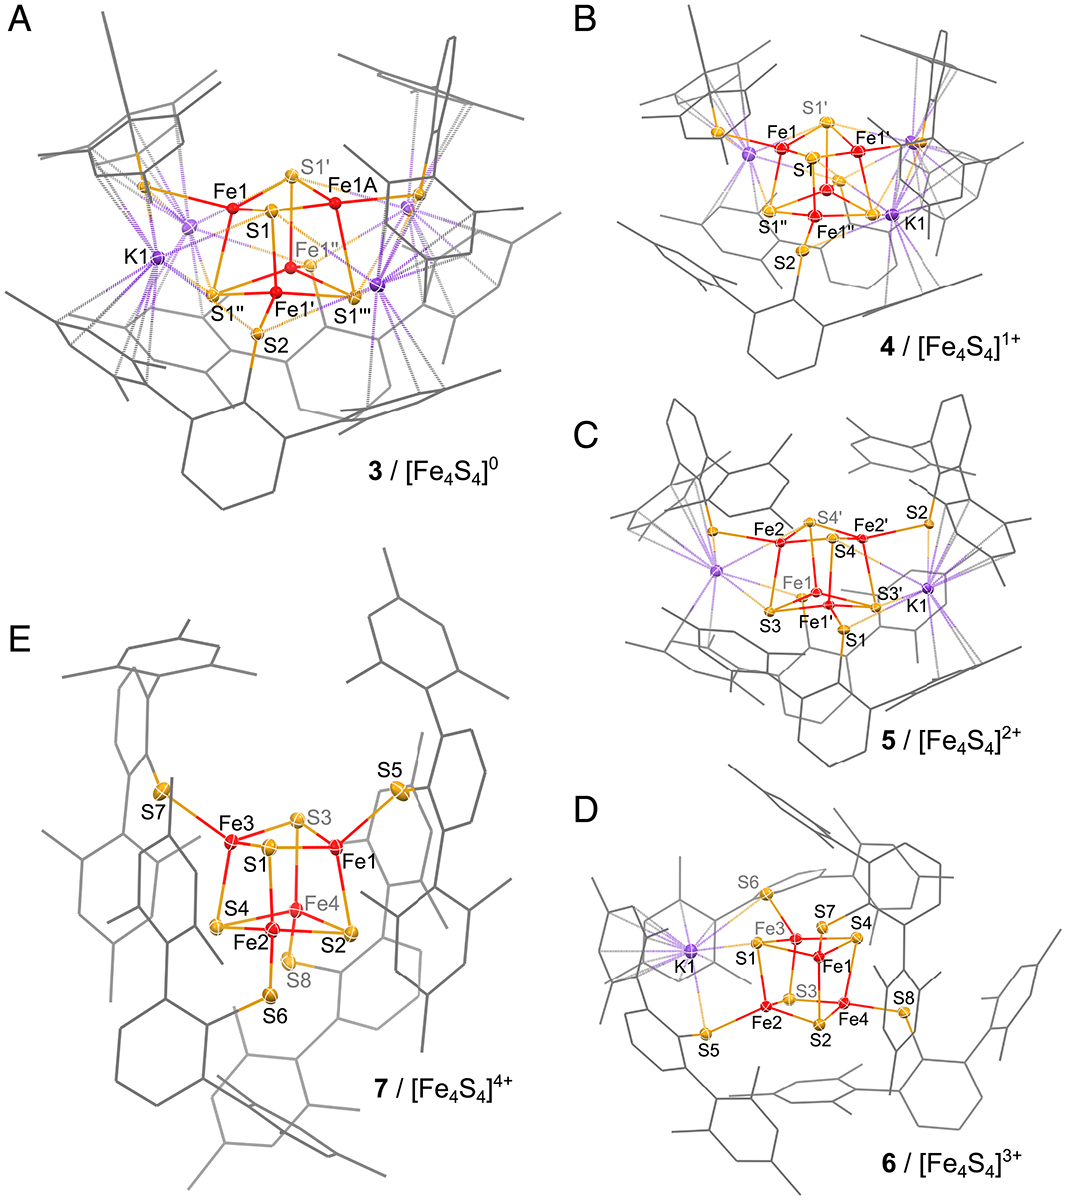 Solid-state molecular structures of Iron-SulfurClusters in different oxidations states in crystals (Grunwald et al. 2022).